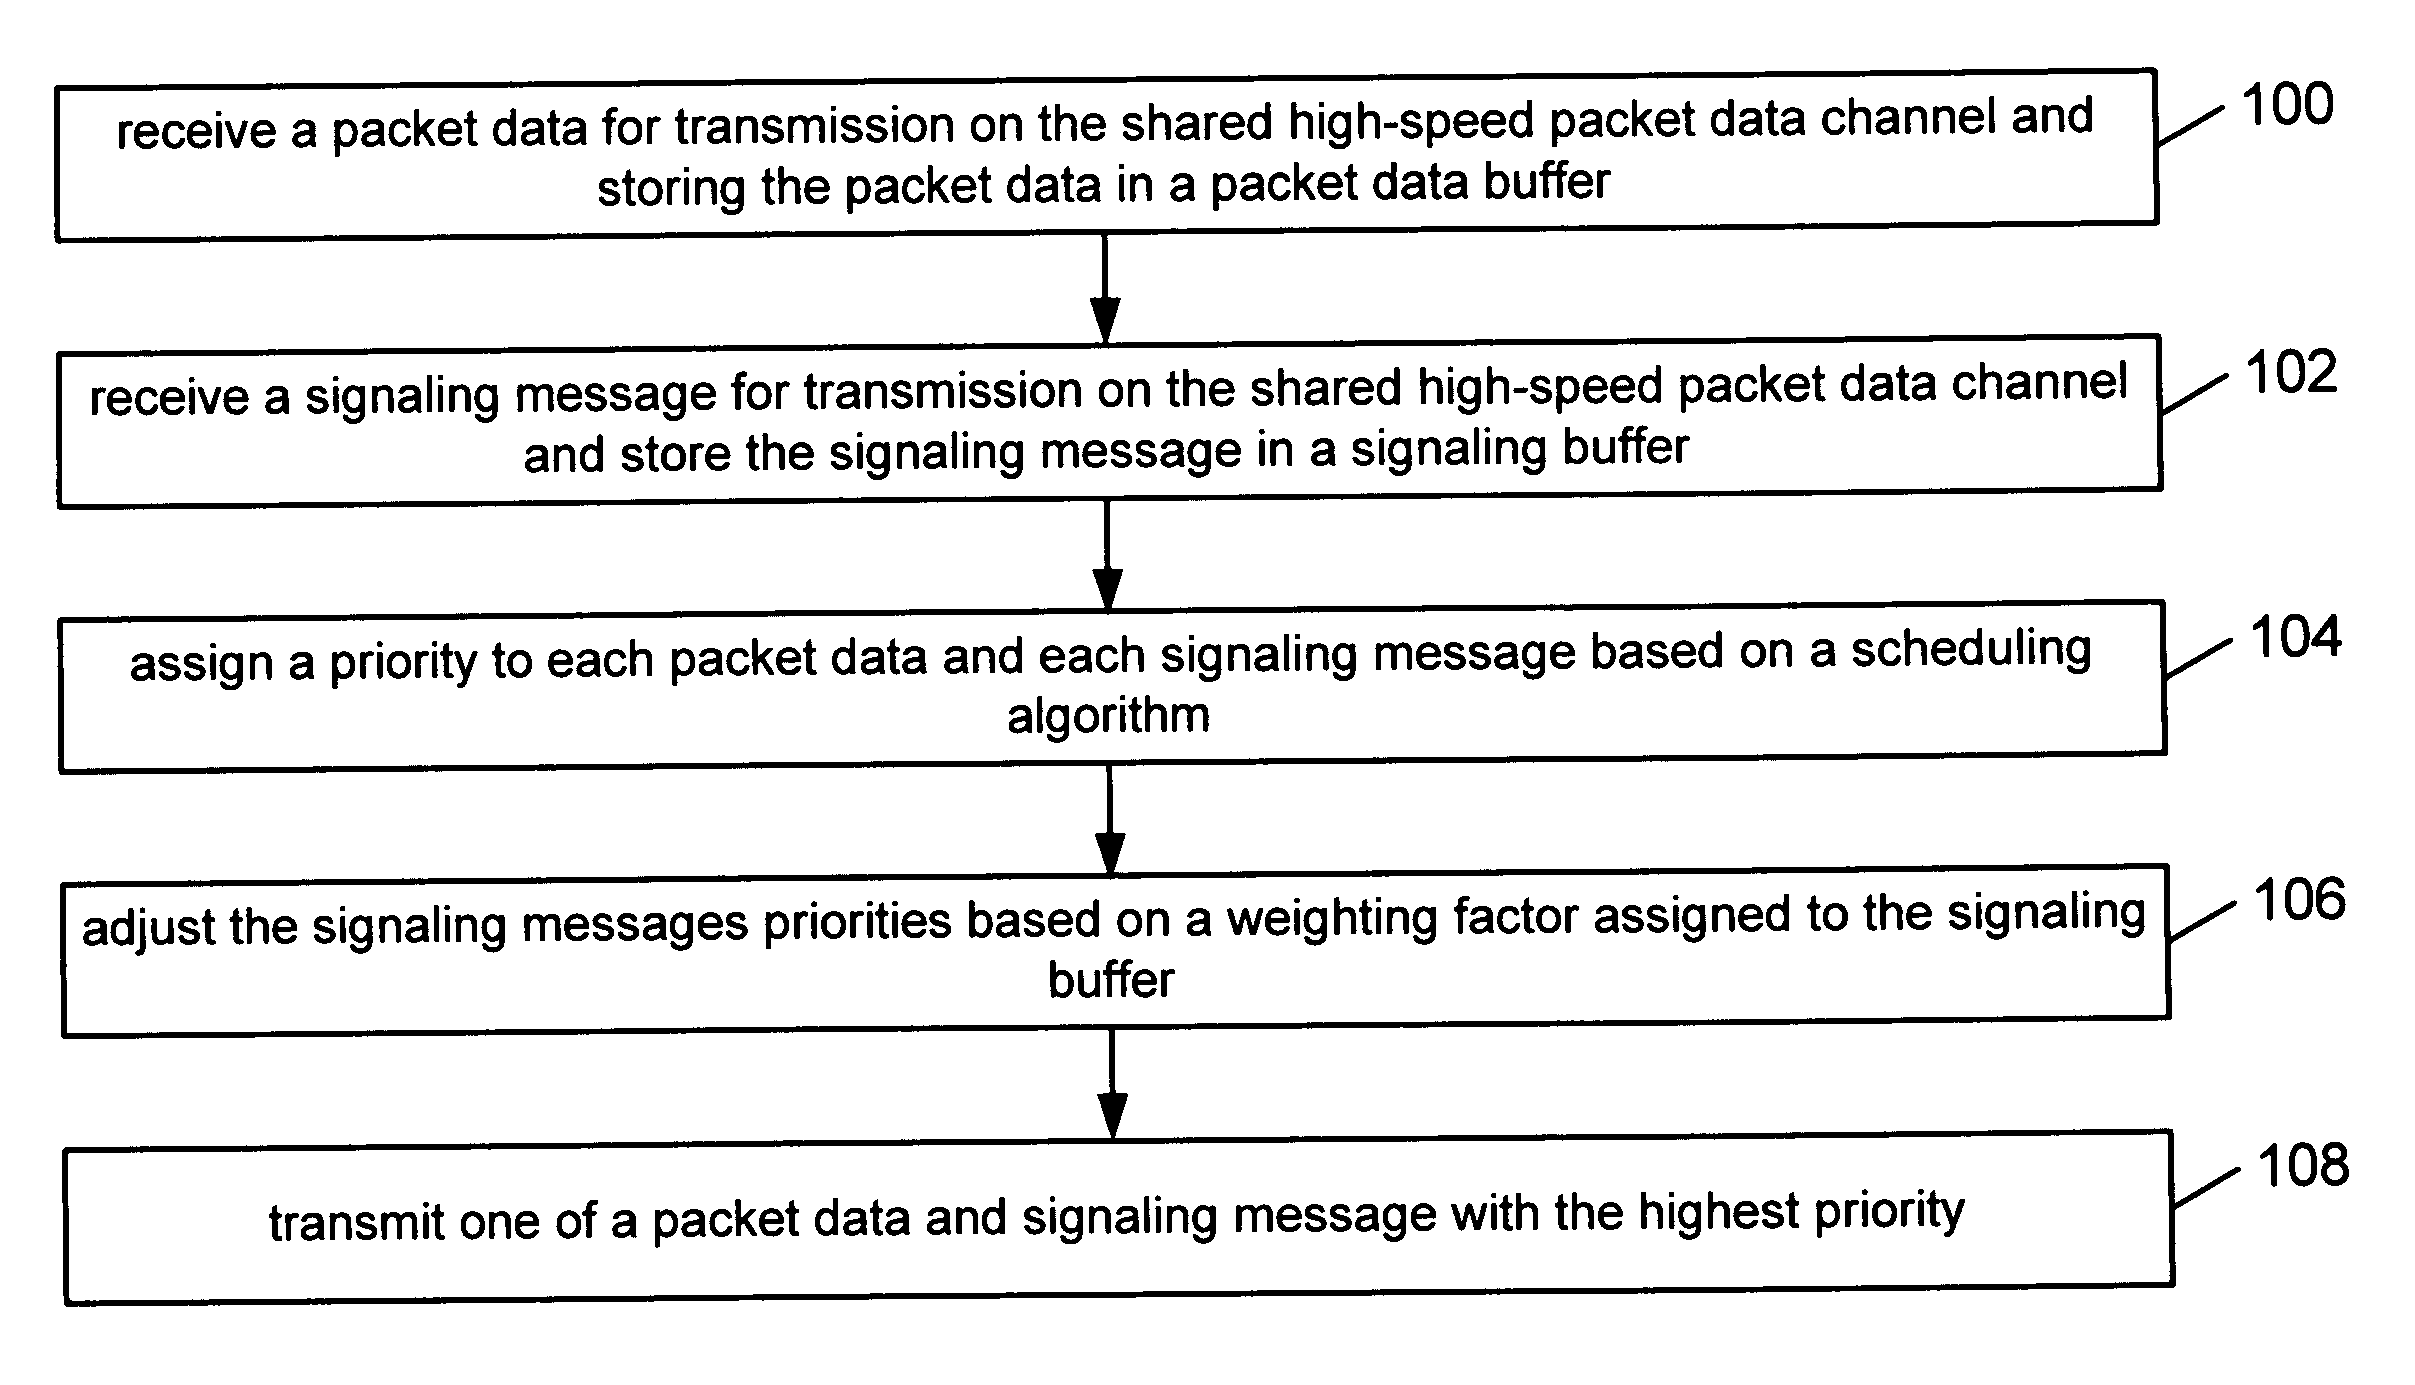 Signaling reliability in using high-speed shared packet data channel